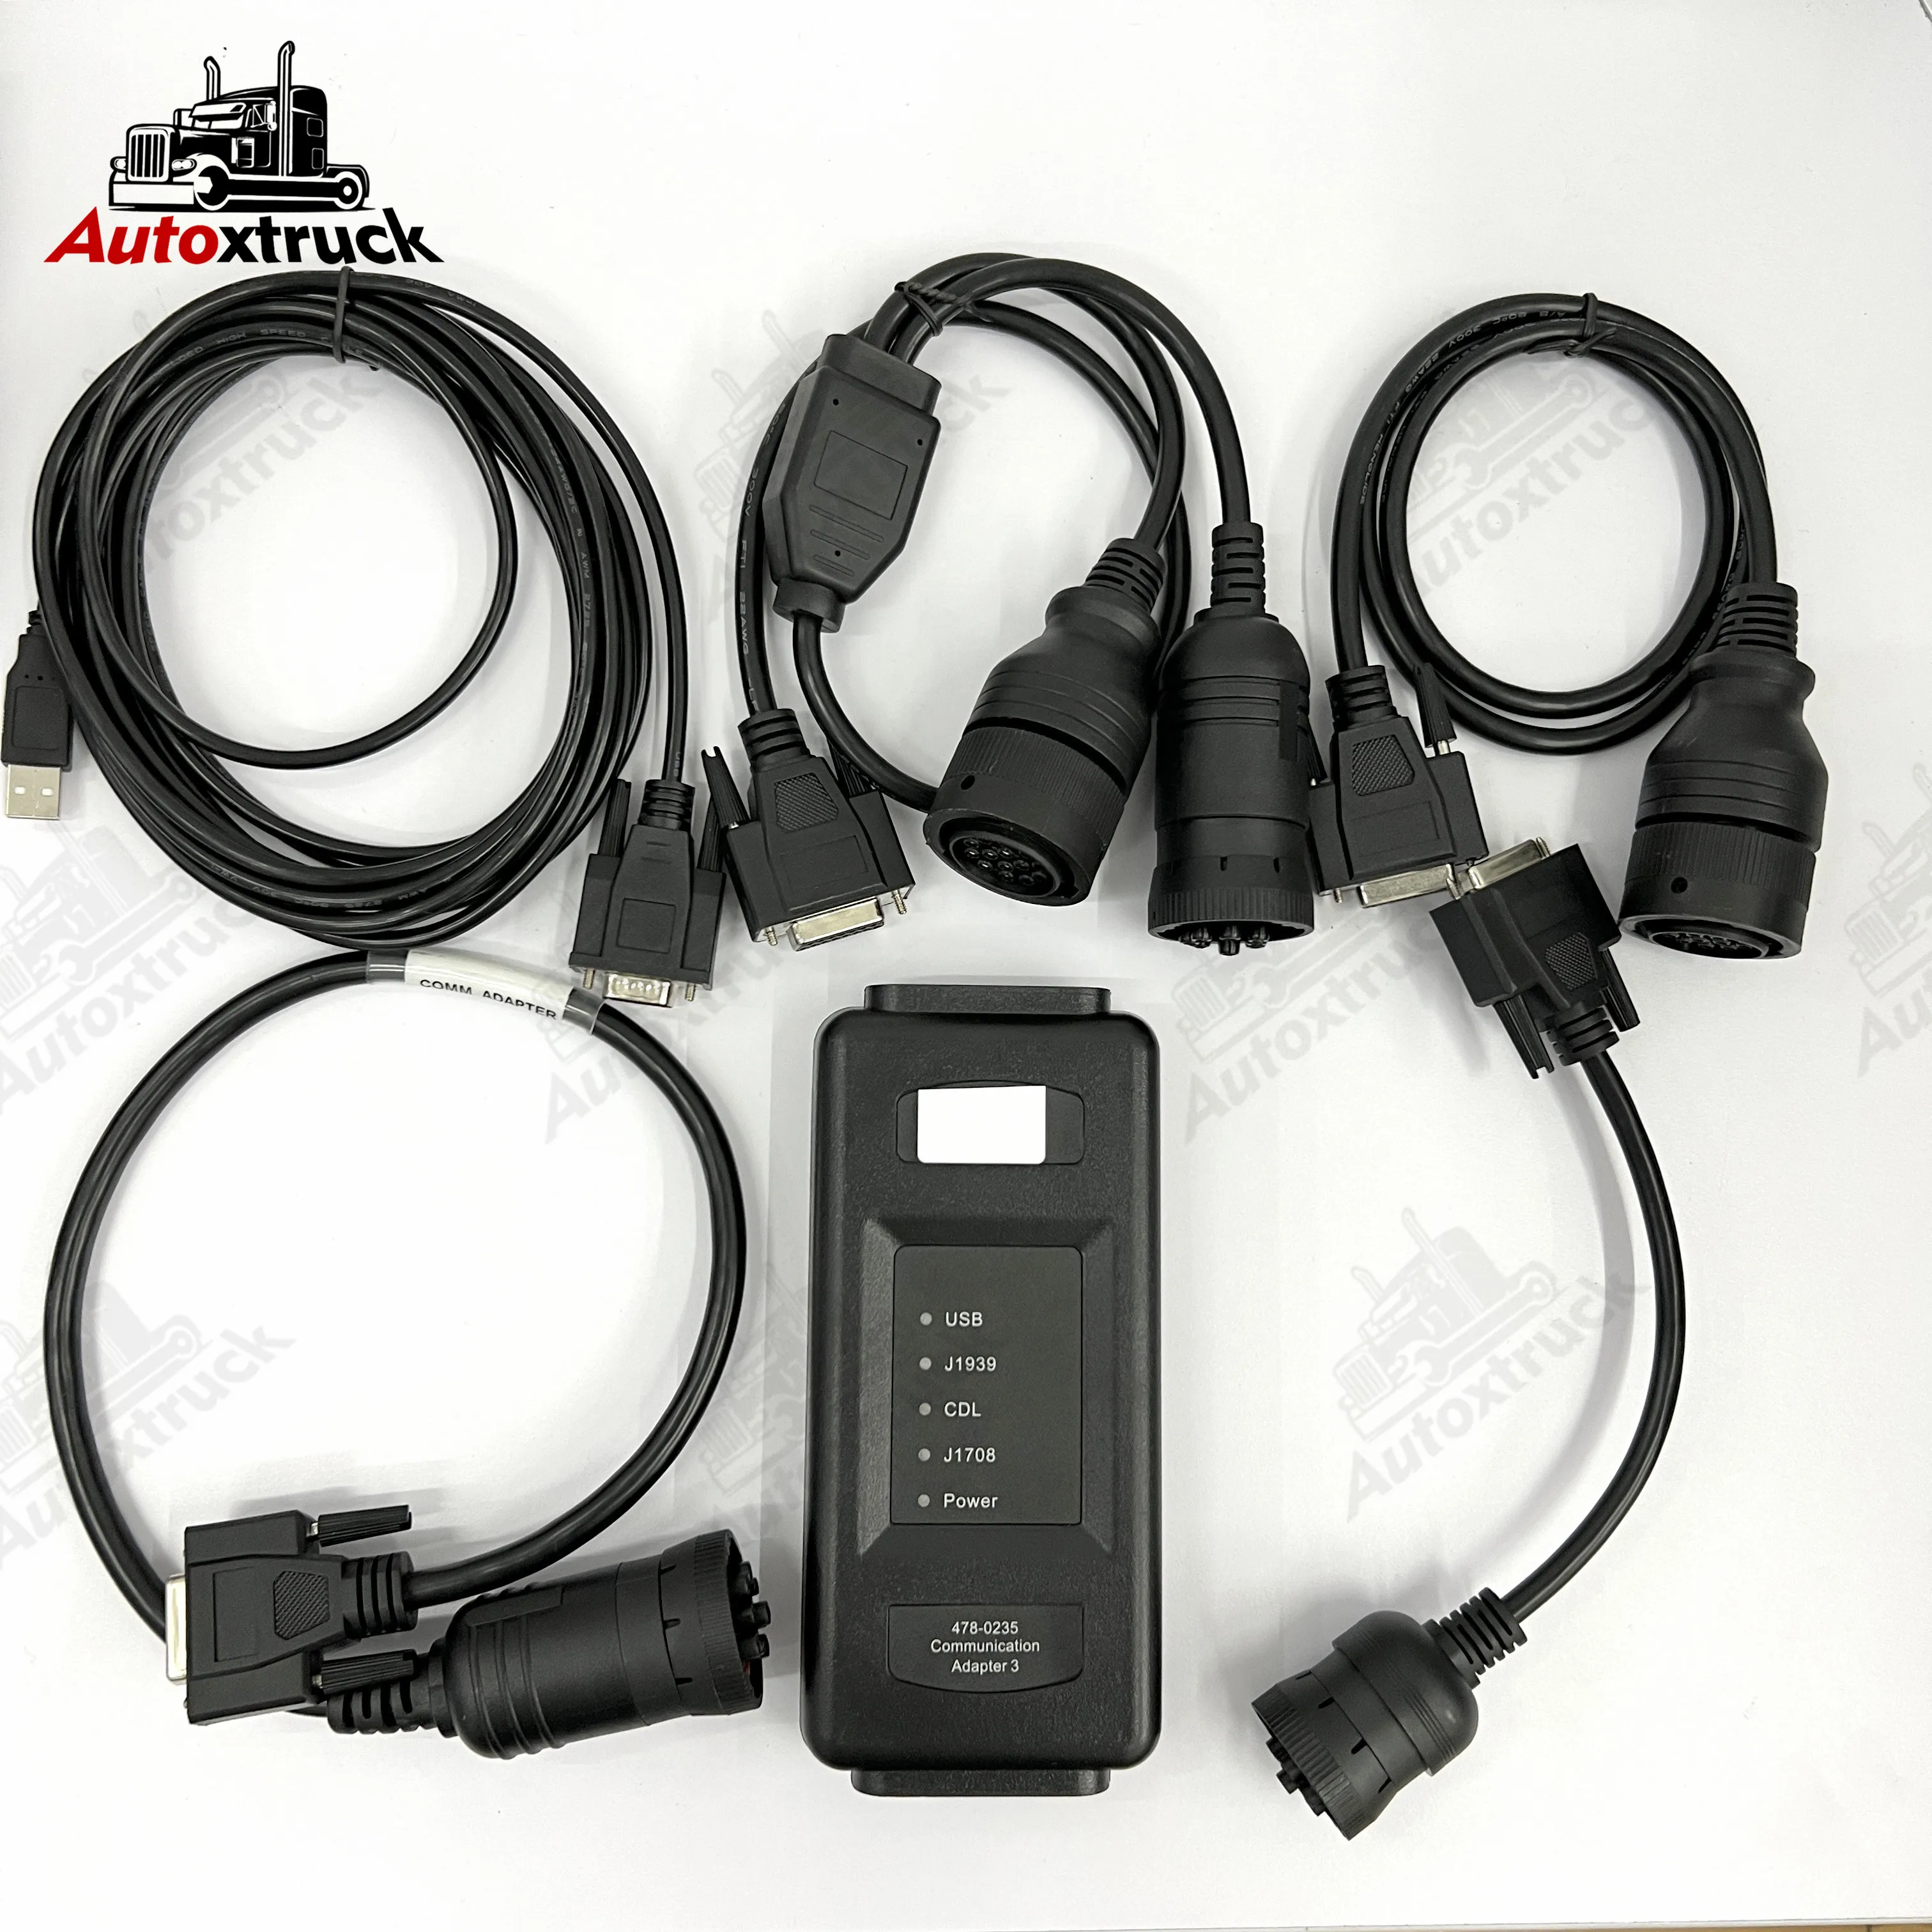 

2022 For ET4 ET SIS Electronic with 9+14 pin cable Truck diagnostic tool Communication Adapter 4 478-0235